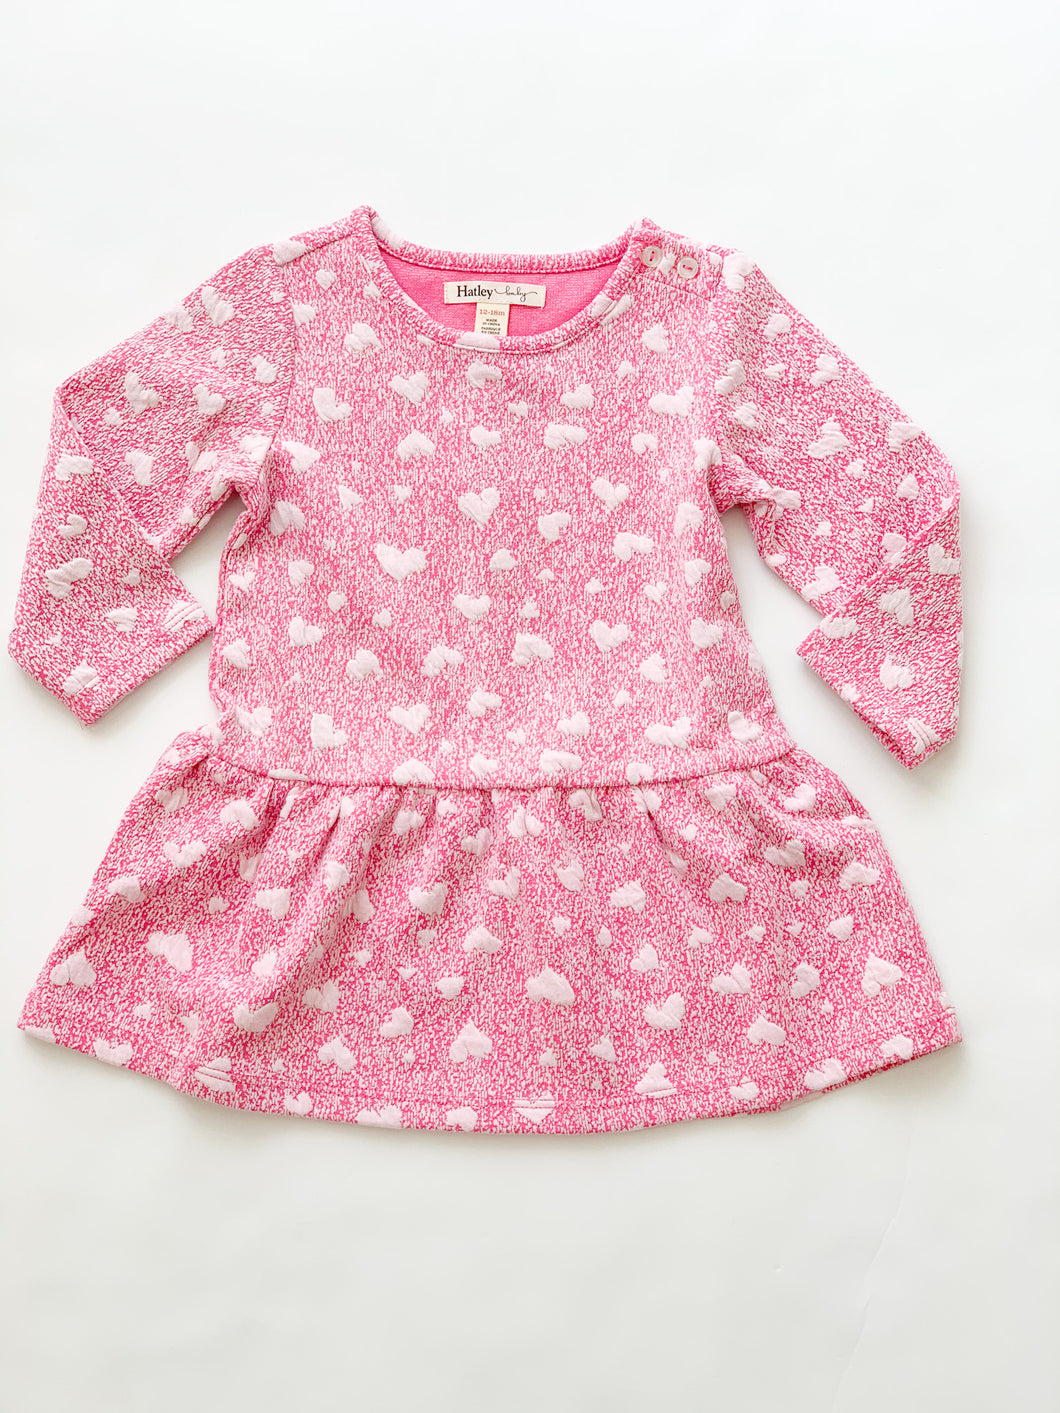 Quilted Hearts Baby Flounce Skirt Dress- Toddler Girls